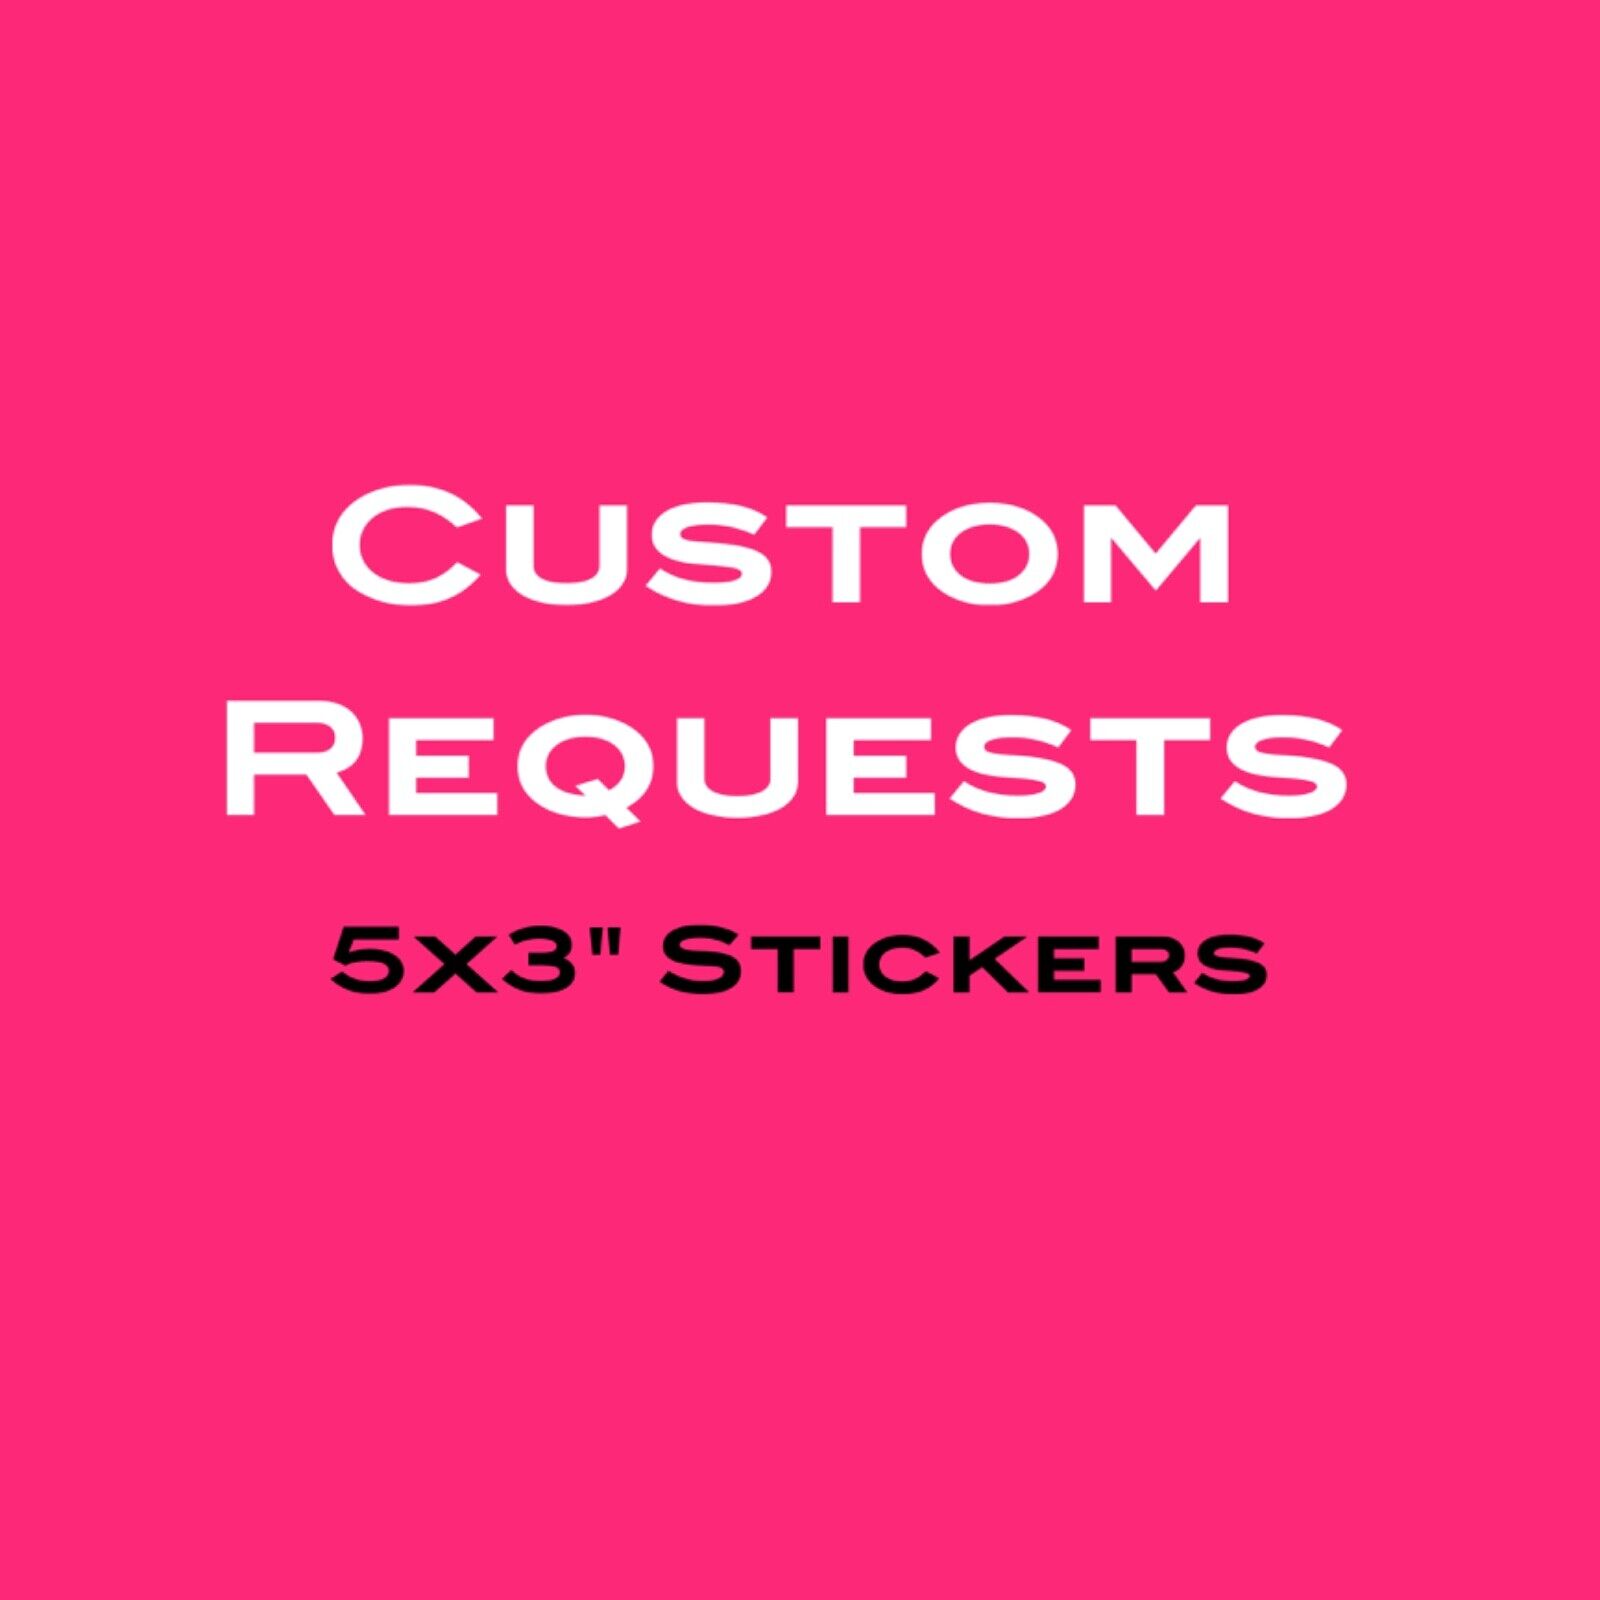 ORDER CUSTOM DECAL STICKERS: Size: 5x3\